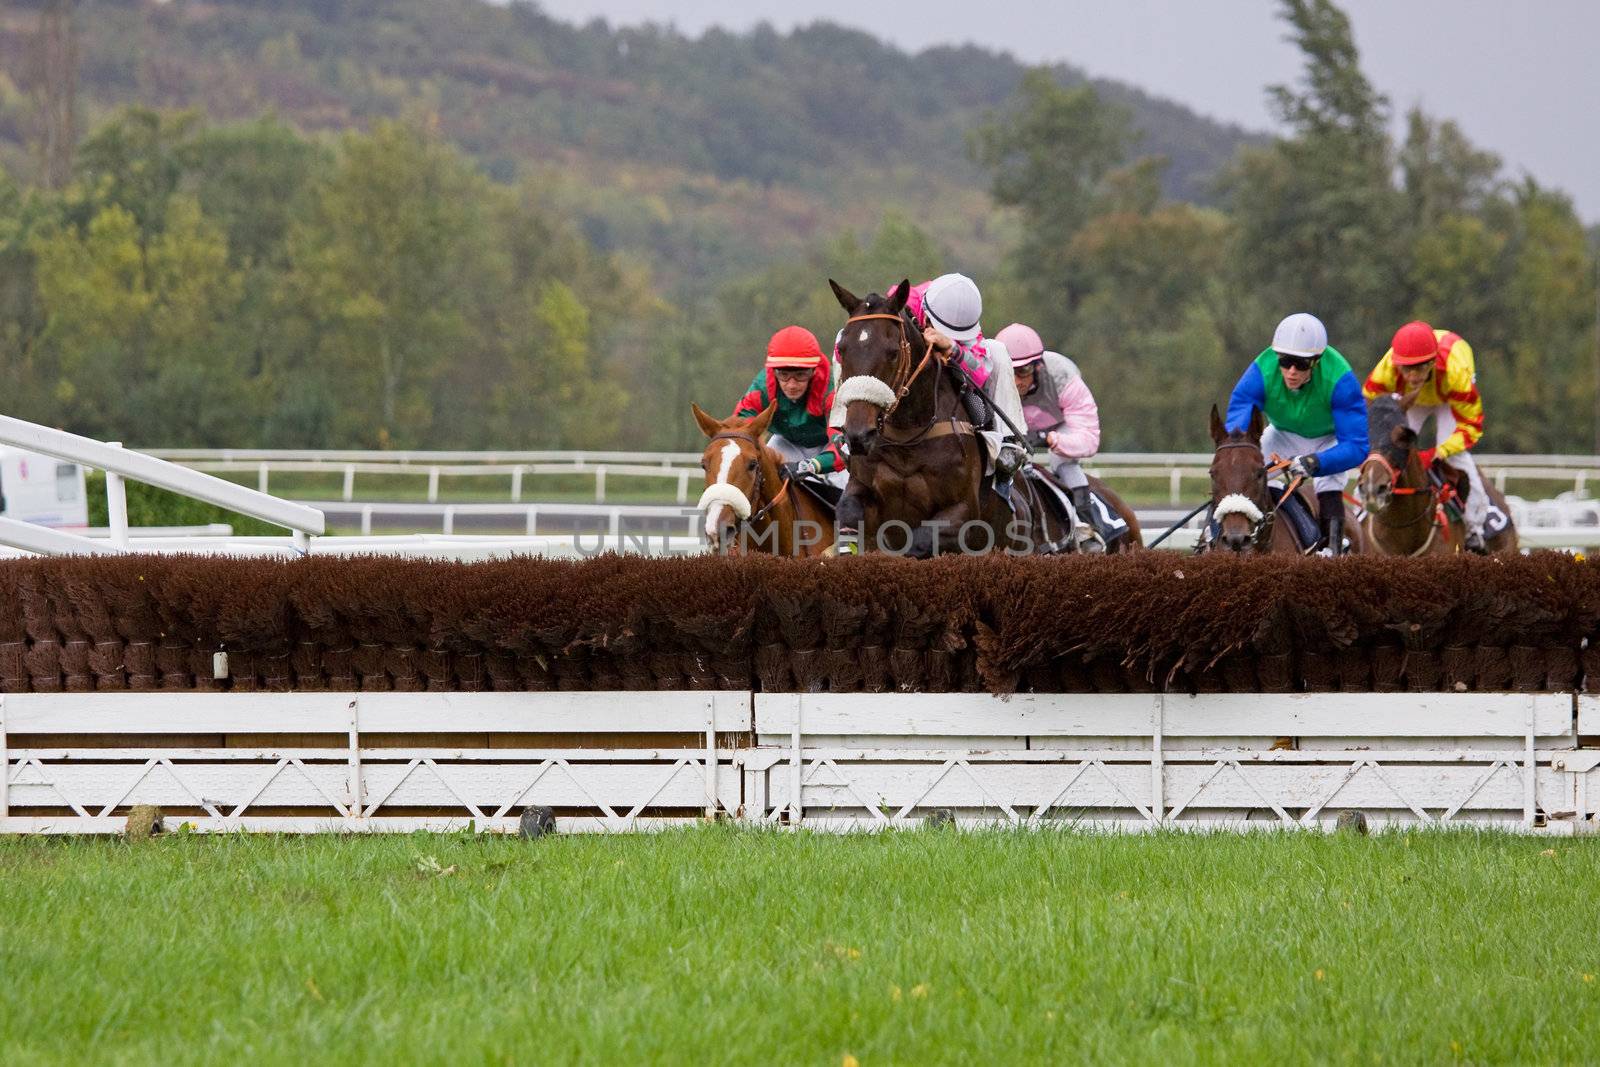 Horse Racing in France 7 by pjhpix